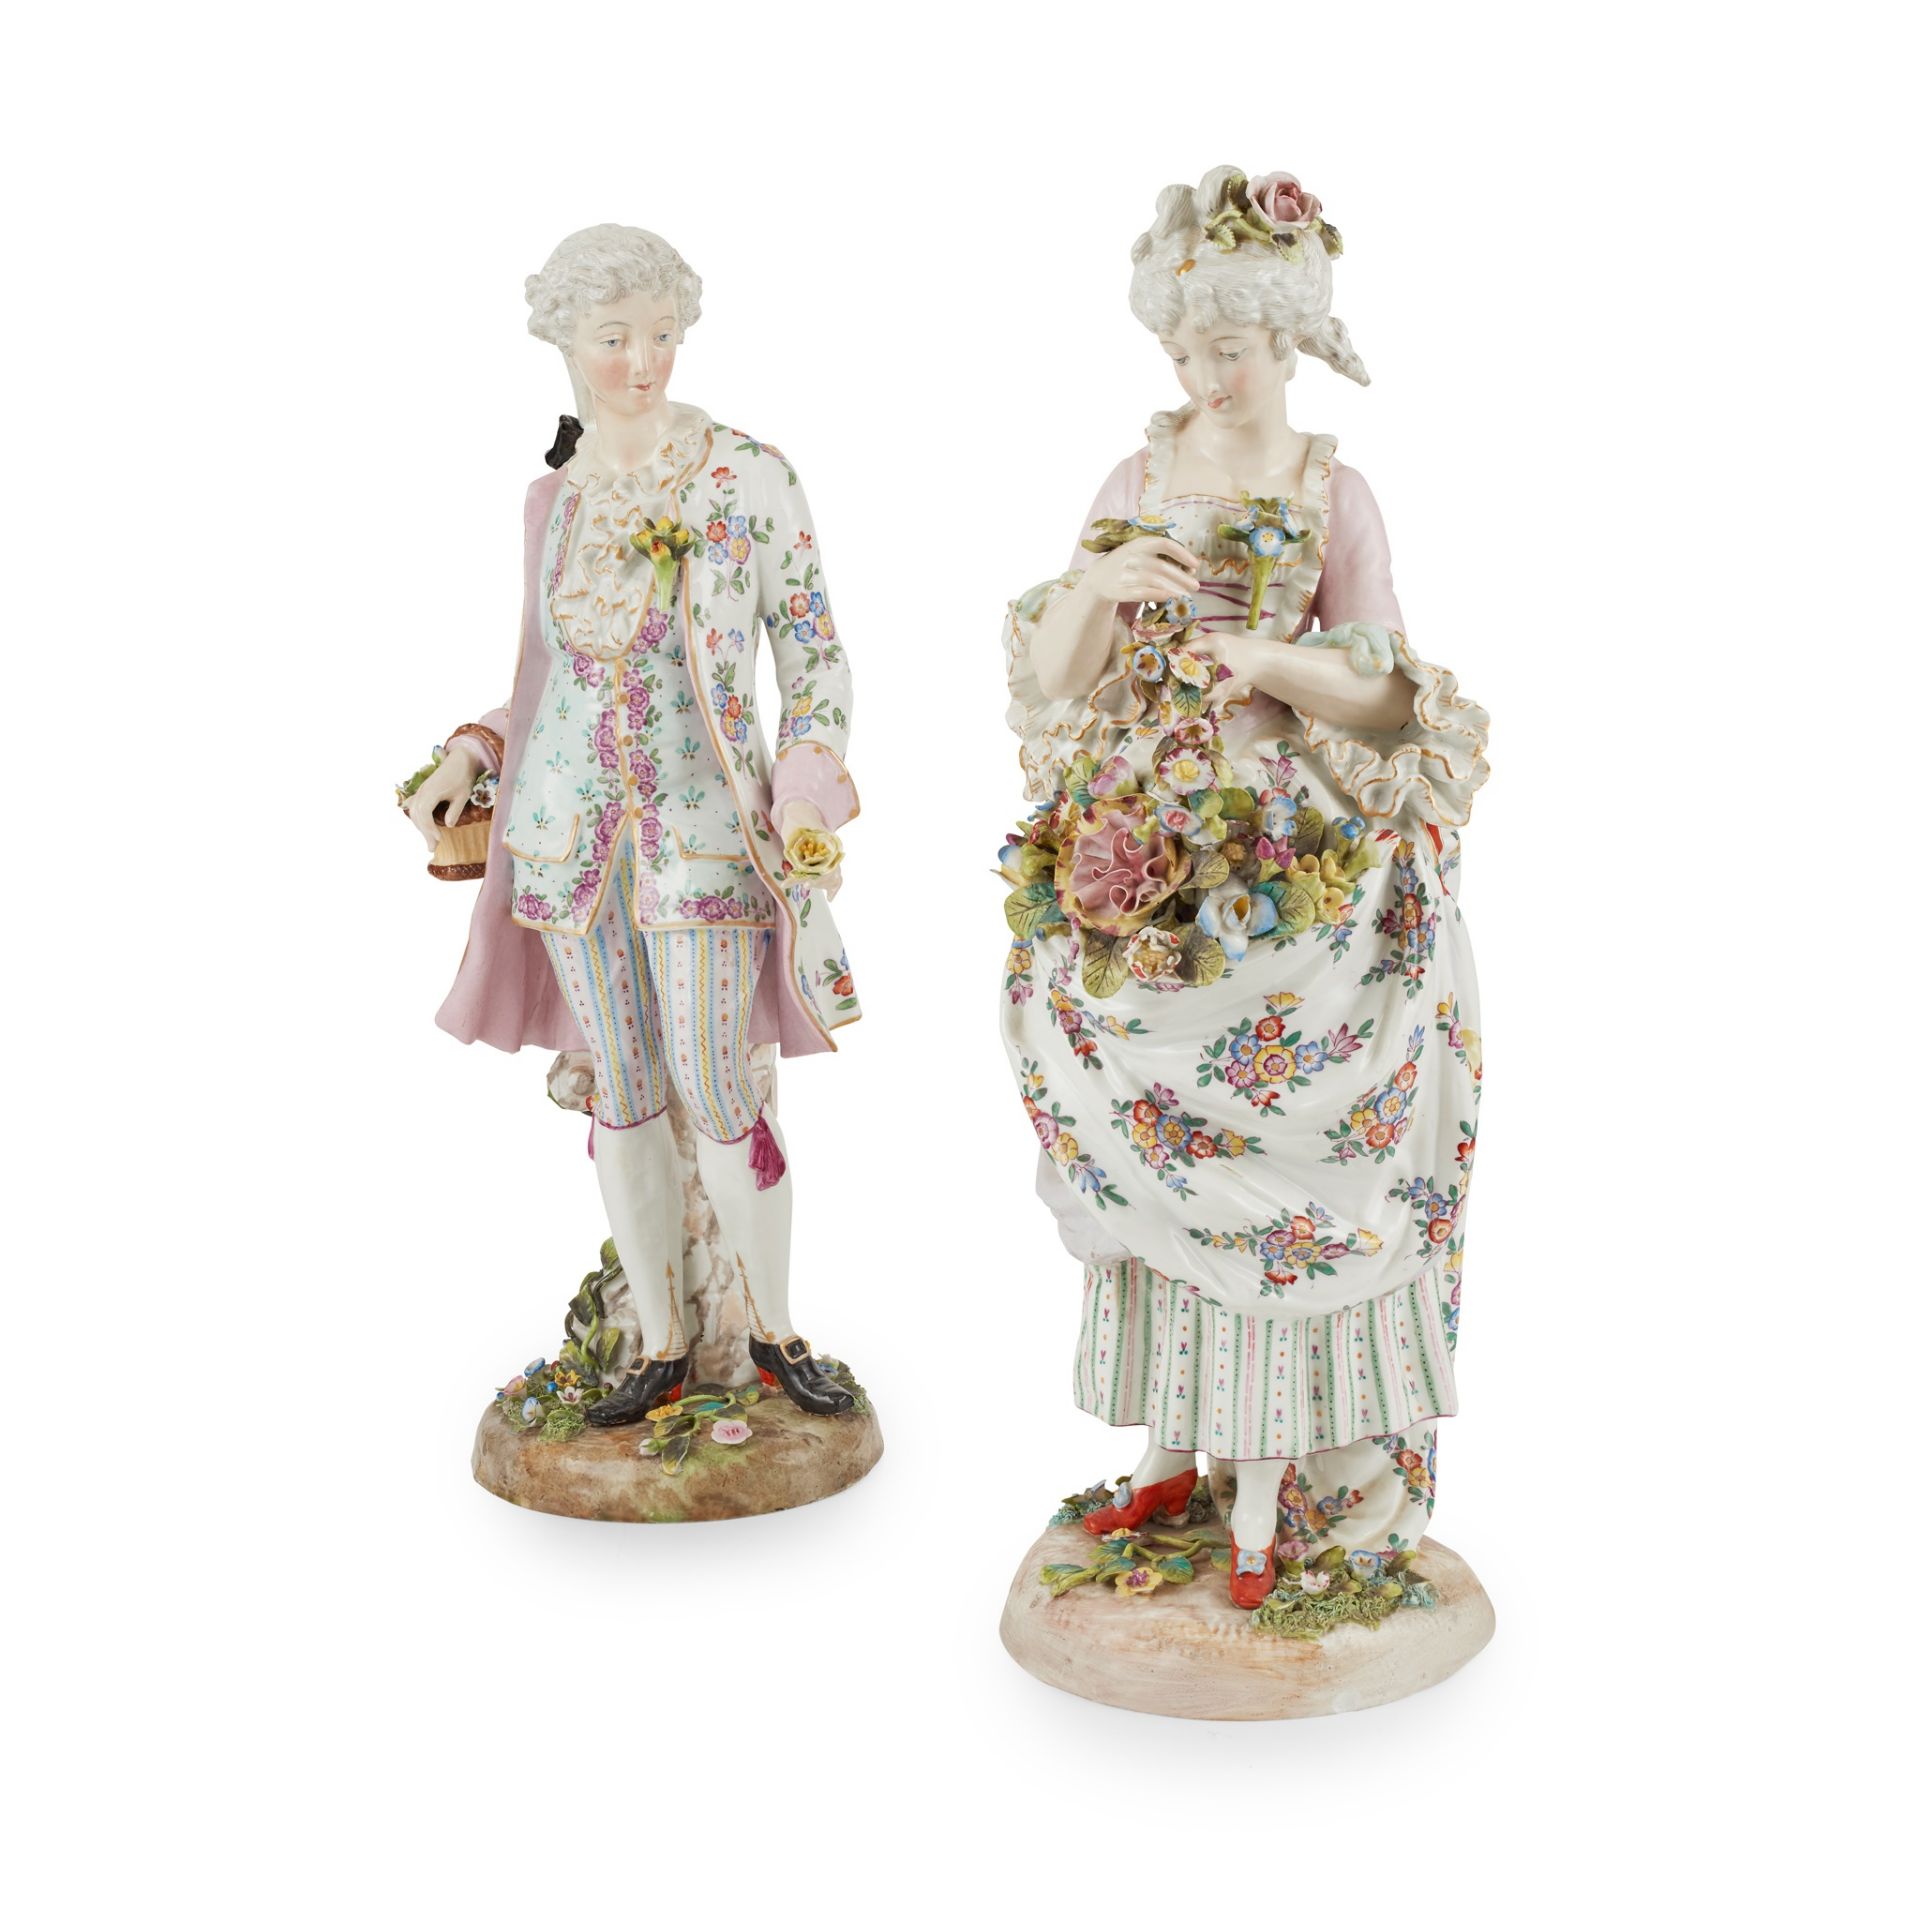 PAIR OF DRESDEN PORCELAIN FIGURES OF A GENTLEMAN AND COMPANION LATE 19TH CENTURY